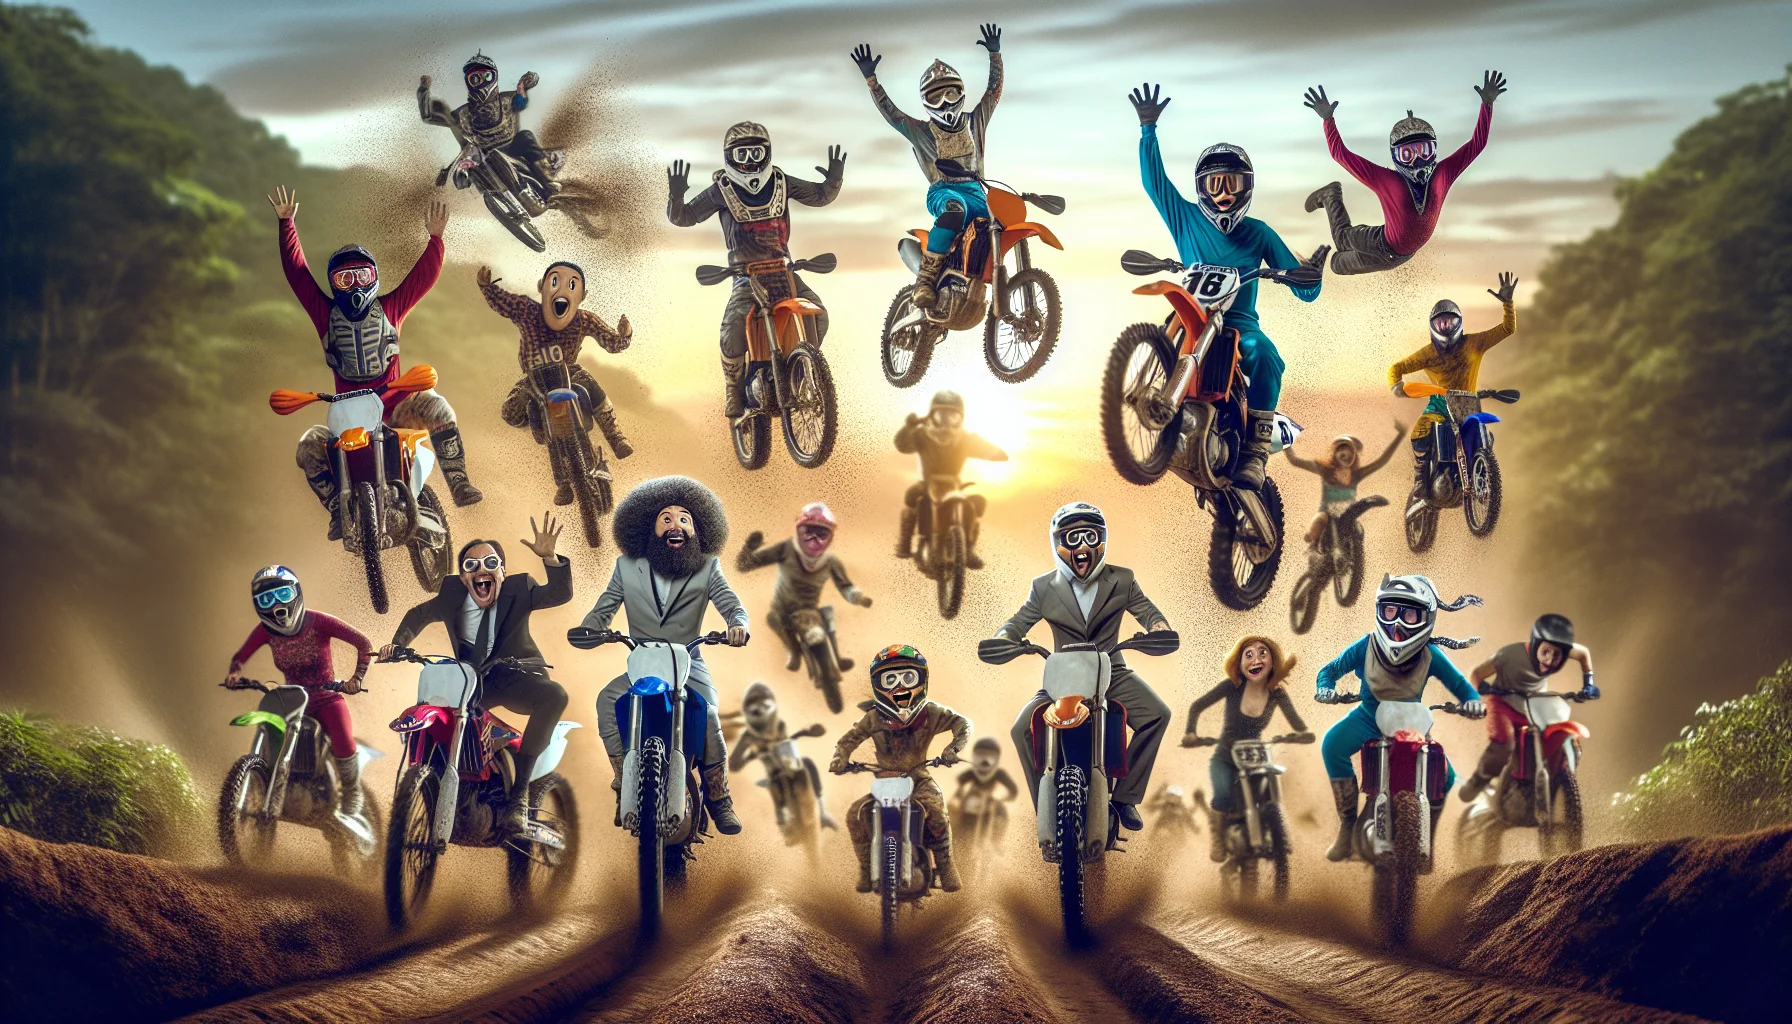 Create a vivid visual of a comical scene taking place in a well-lit outdoor trail set against the backdrop of a sunrise. The centerpiece of the scene is an array of dirt bike riders of various genders and descents, like Caucasian, Black, South Asian and Hispanic, performing exhilarating stunts with extreme skill and precision. Their faces are filled with expressions of pure joy and excitement, creating a light-hearted allure. Some bikes are mid-air, pulling off impressive jumps, while others are navigating through grit, showers of flying dirt marking their path. The whimsical touch to this otherwise intense scene should emanate a delightful message encouraging viewers to partake in physical activities.